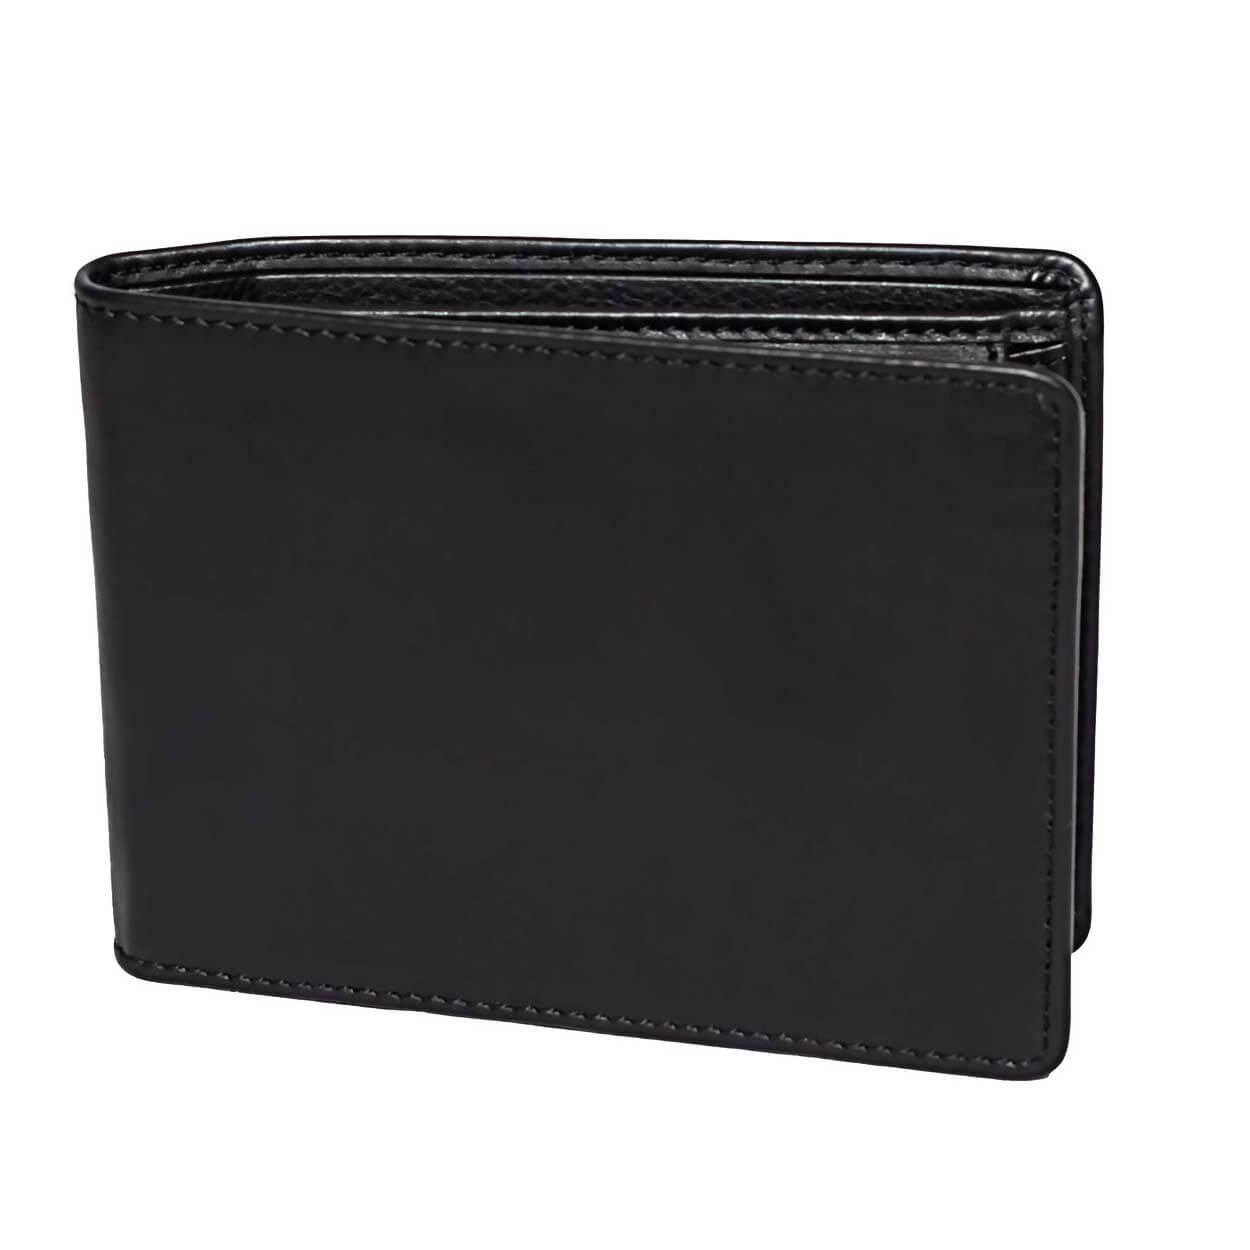 Buy Alexvyan Brown Leather Bi-fold with Lock Men Purse Wallet -6 (Card &  ID) Organizer Holder 1 Long Pocket 2 Small Pocket, 2 Zipper Pocket for Boys  Gents Male - for Bags